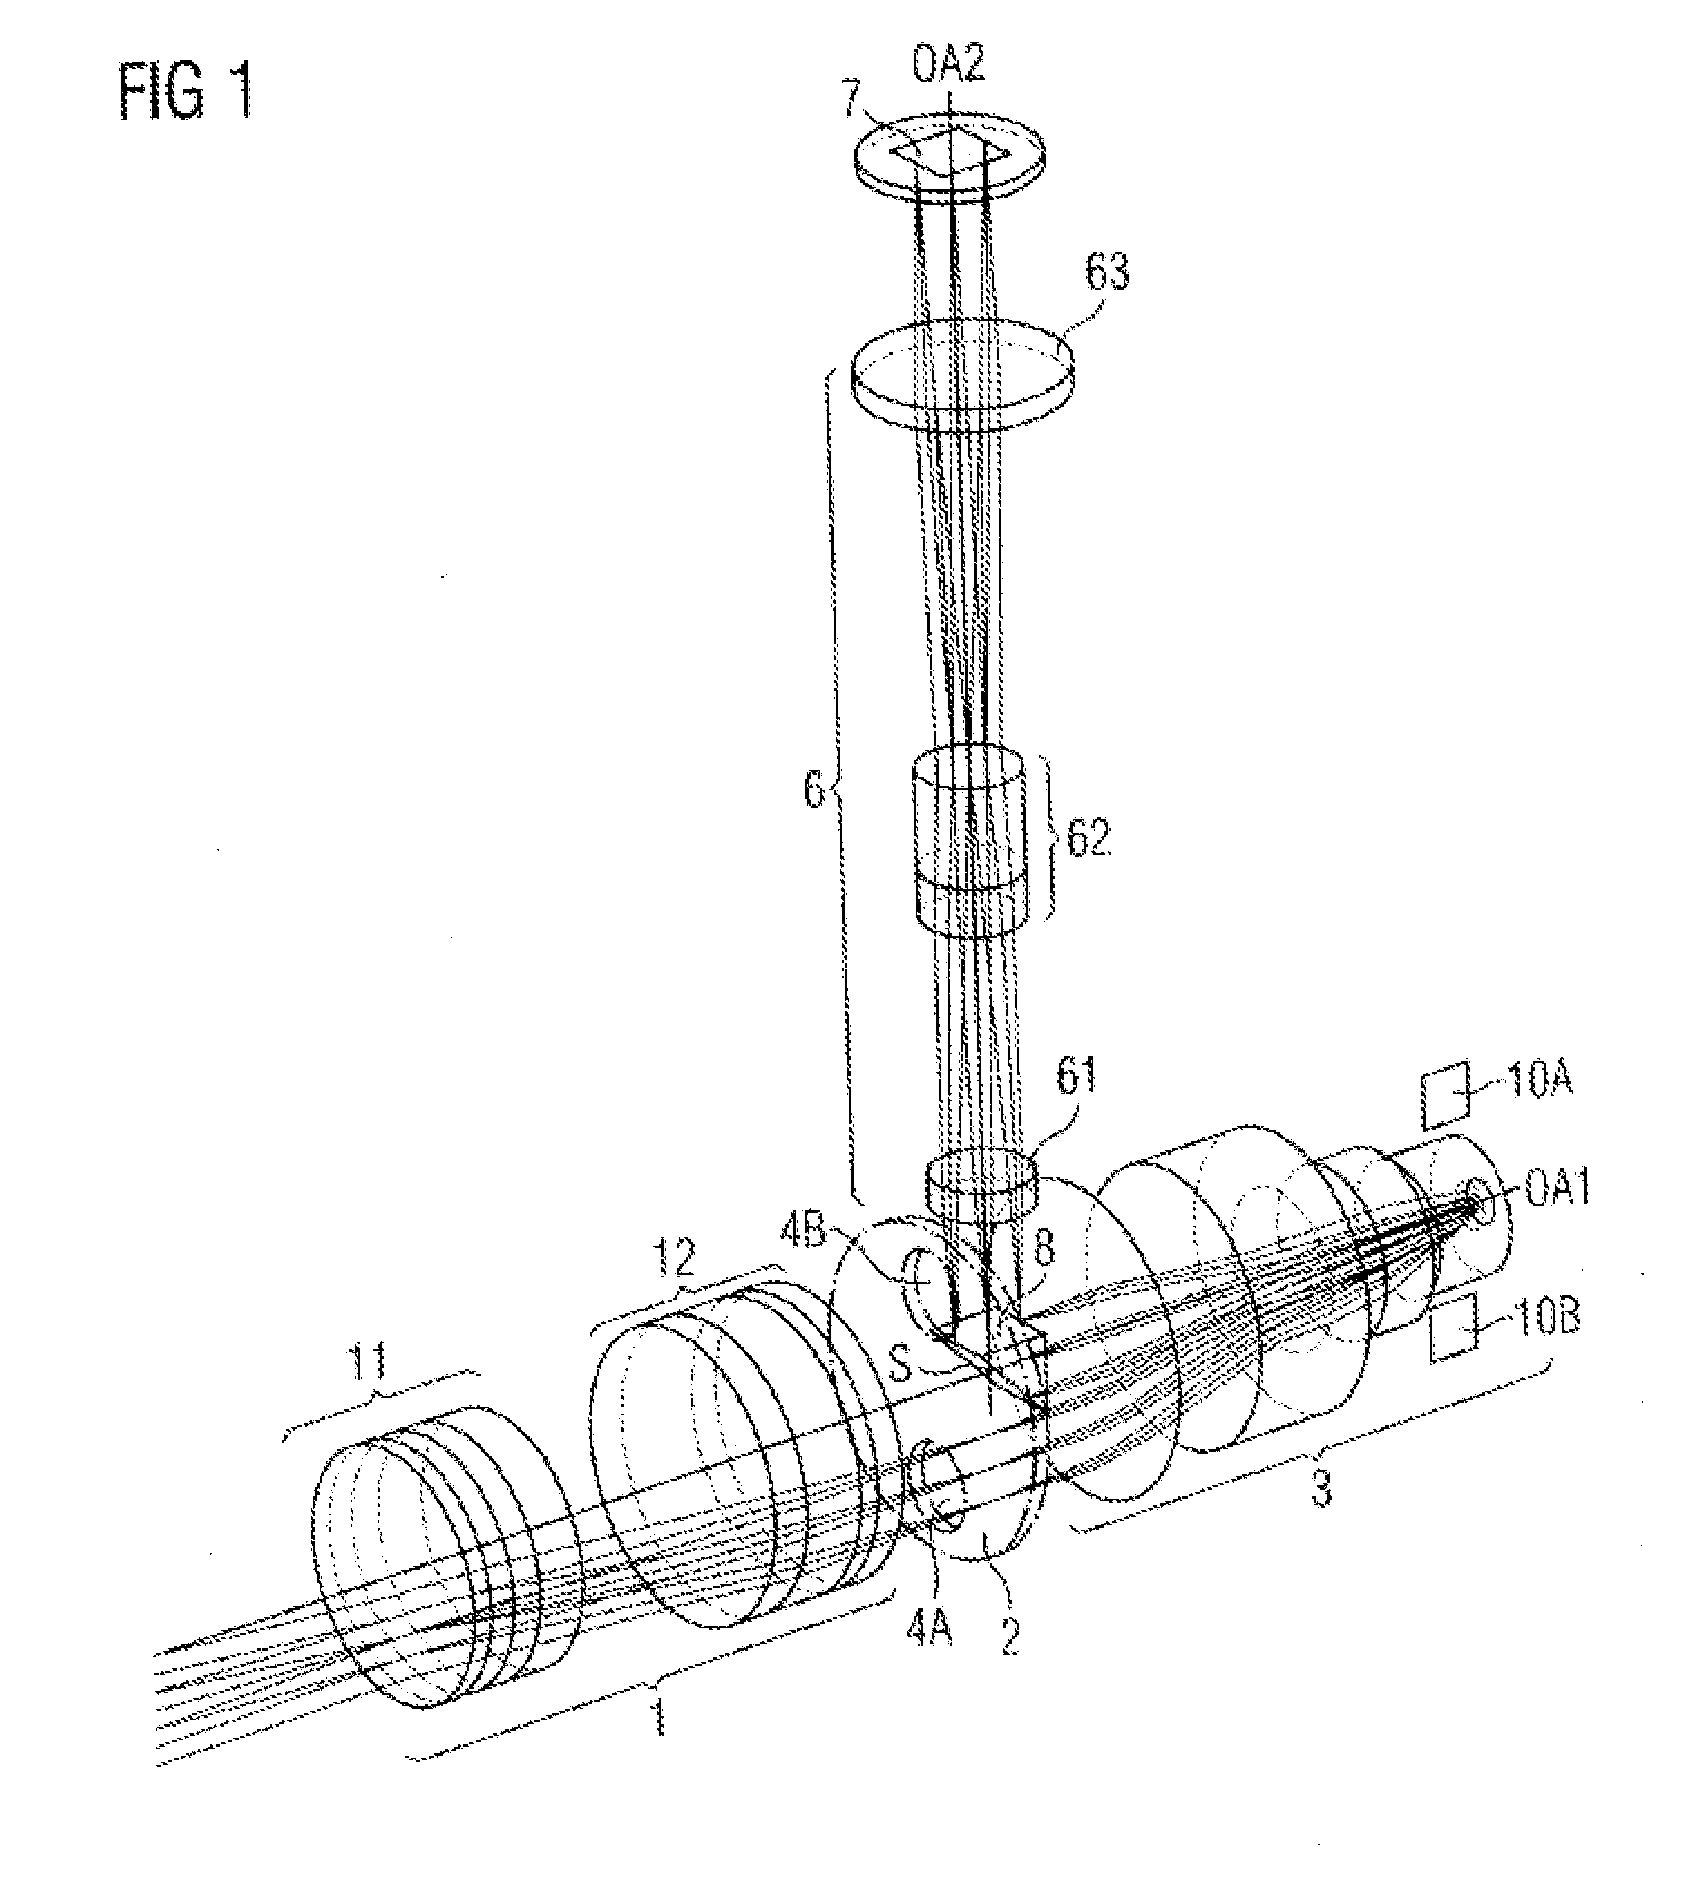 Optical observation instrument with at least two optical transmission channels that respectively have one partial ray path